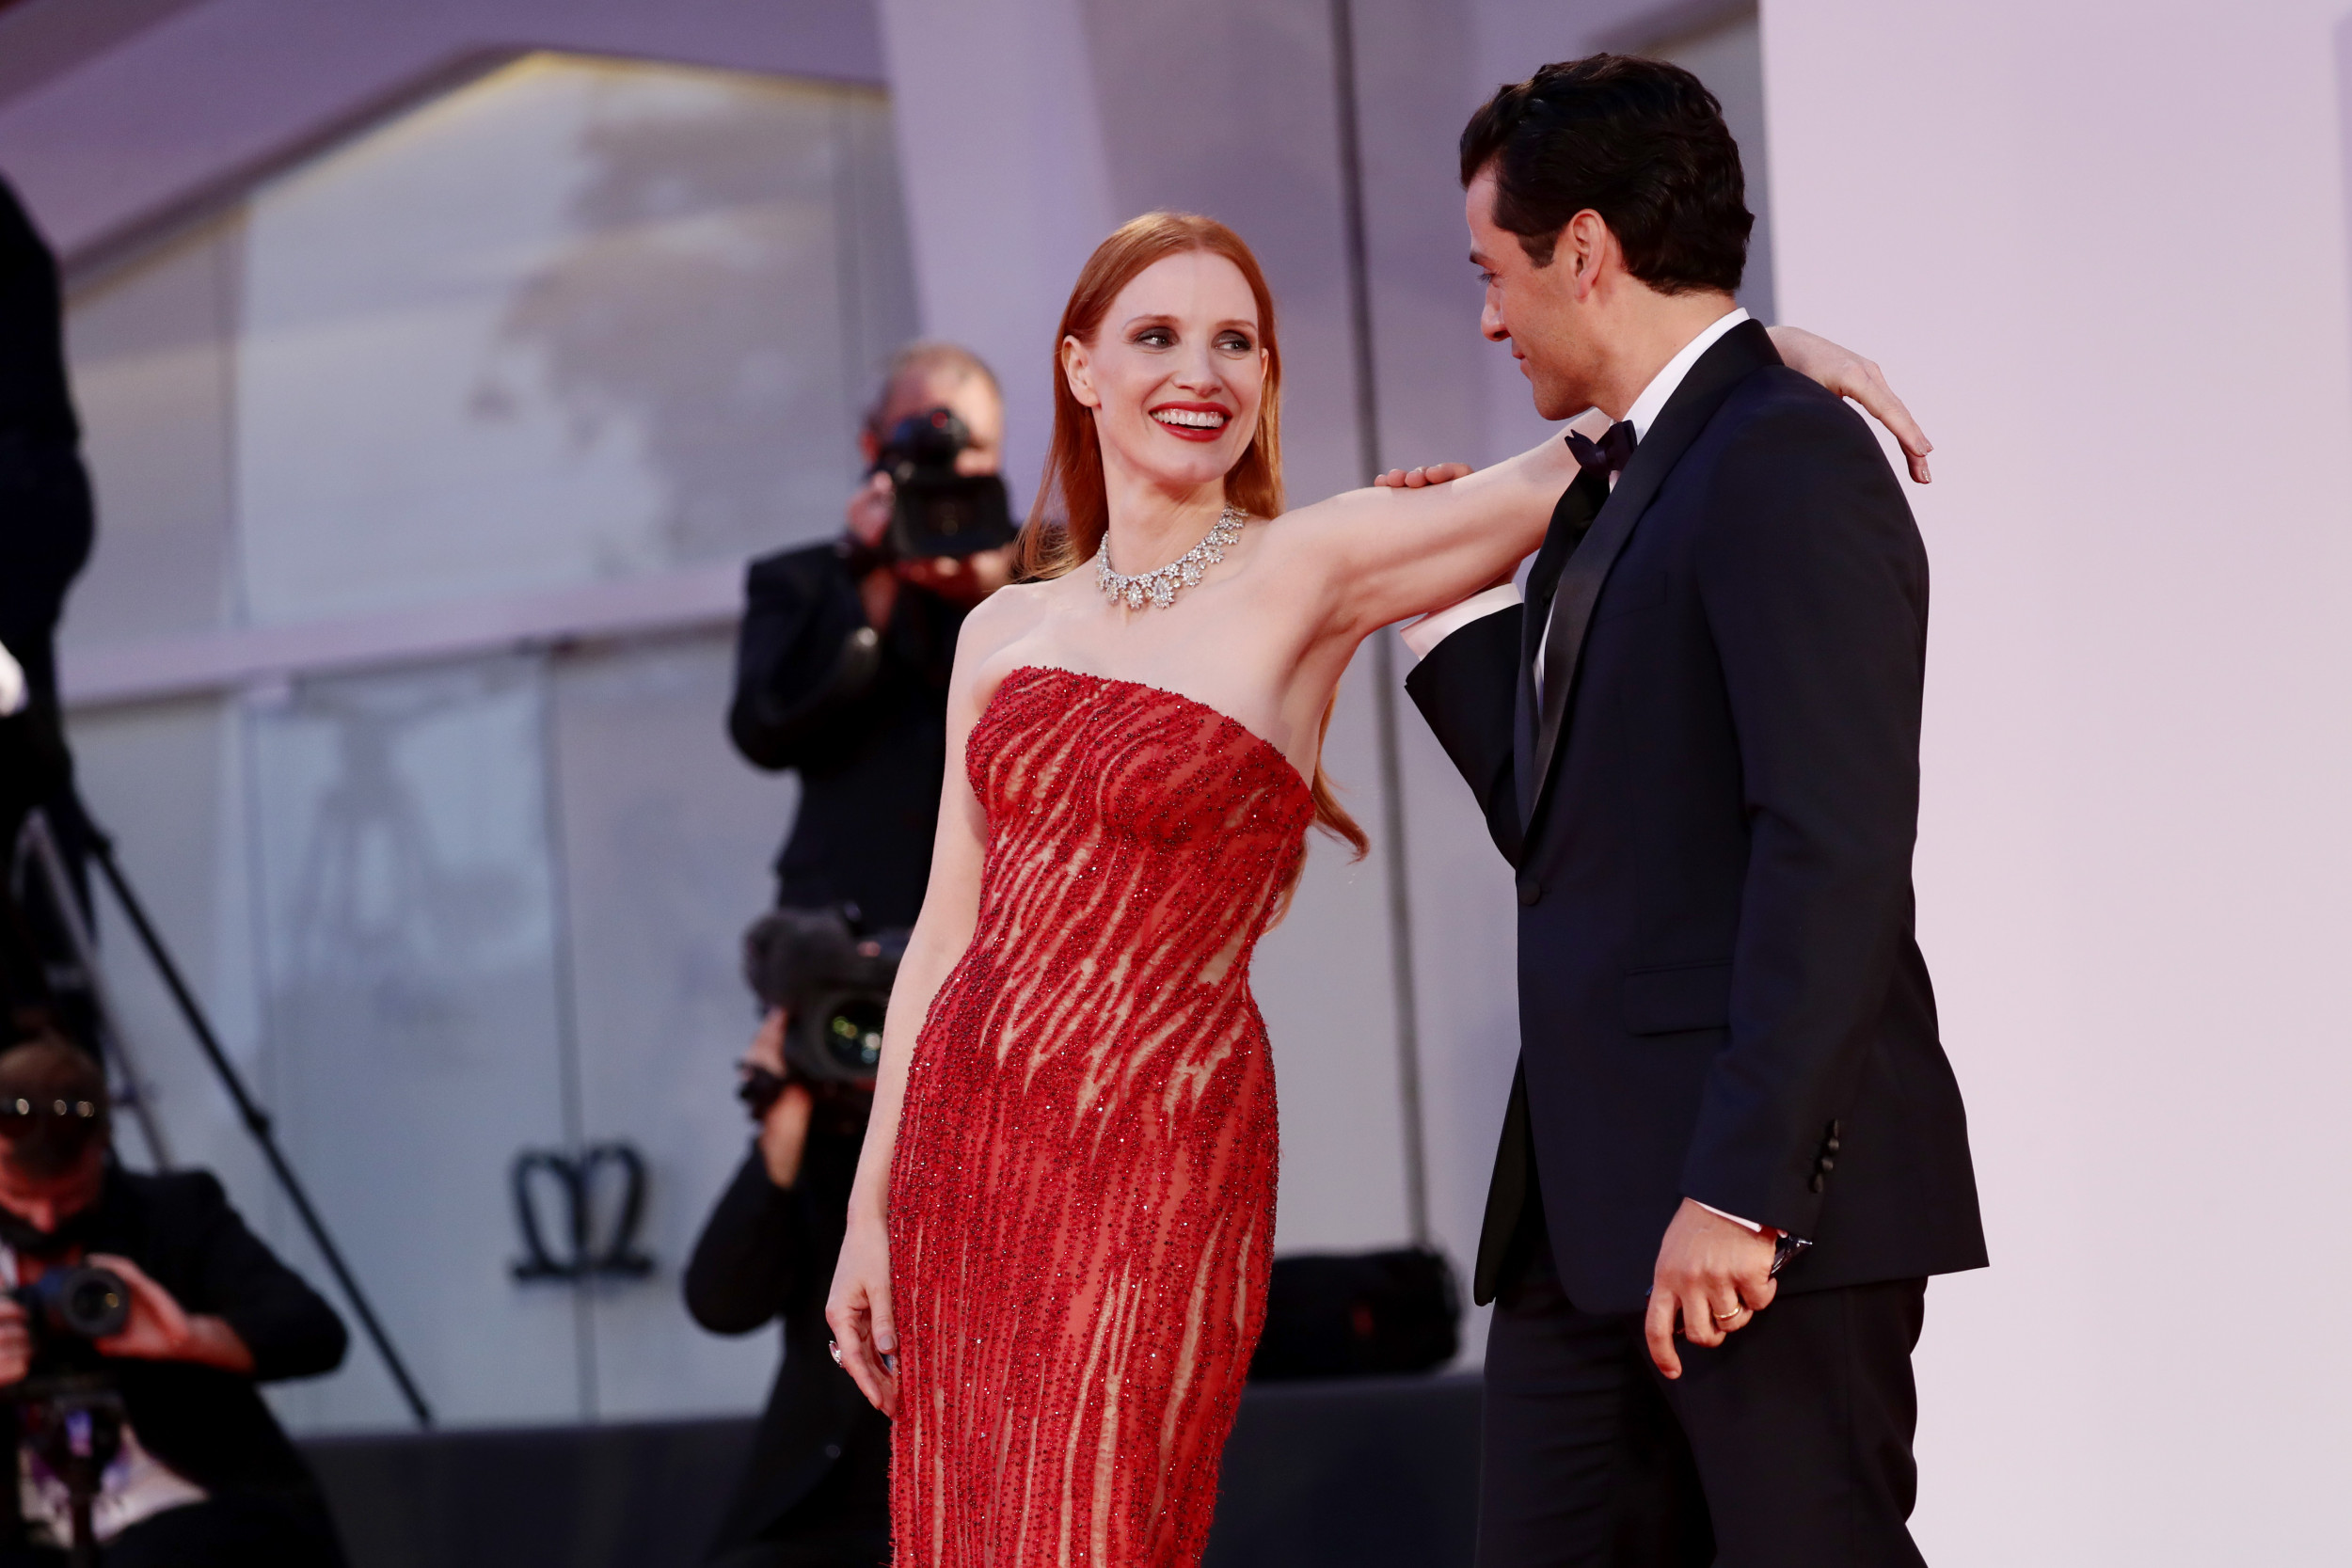 Are Jessica Chastain and Oscar Isaac Dating After Venice Red Carpet